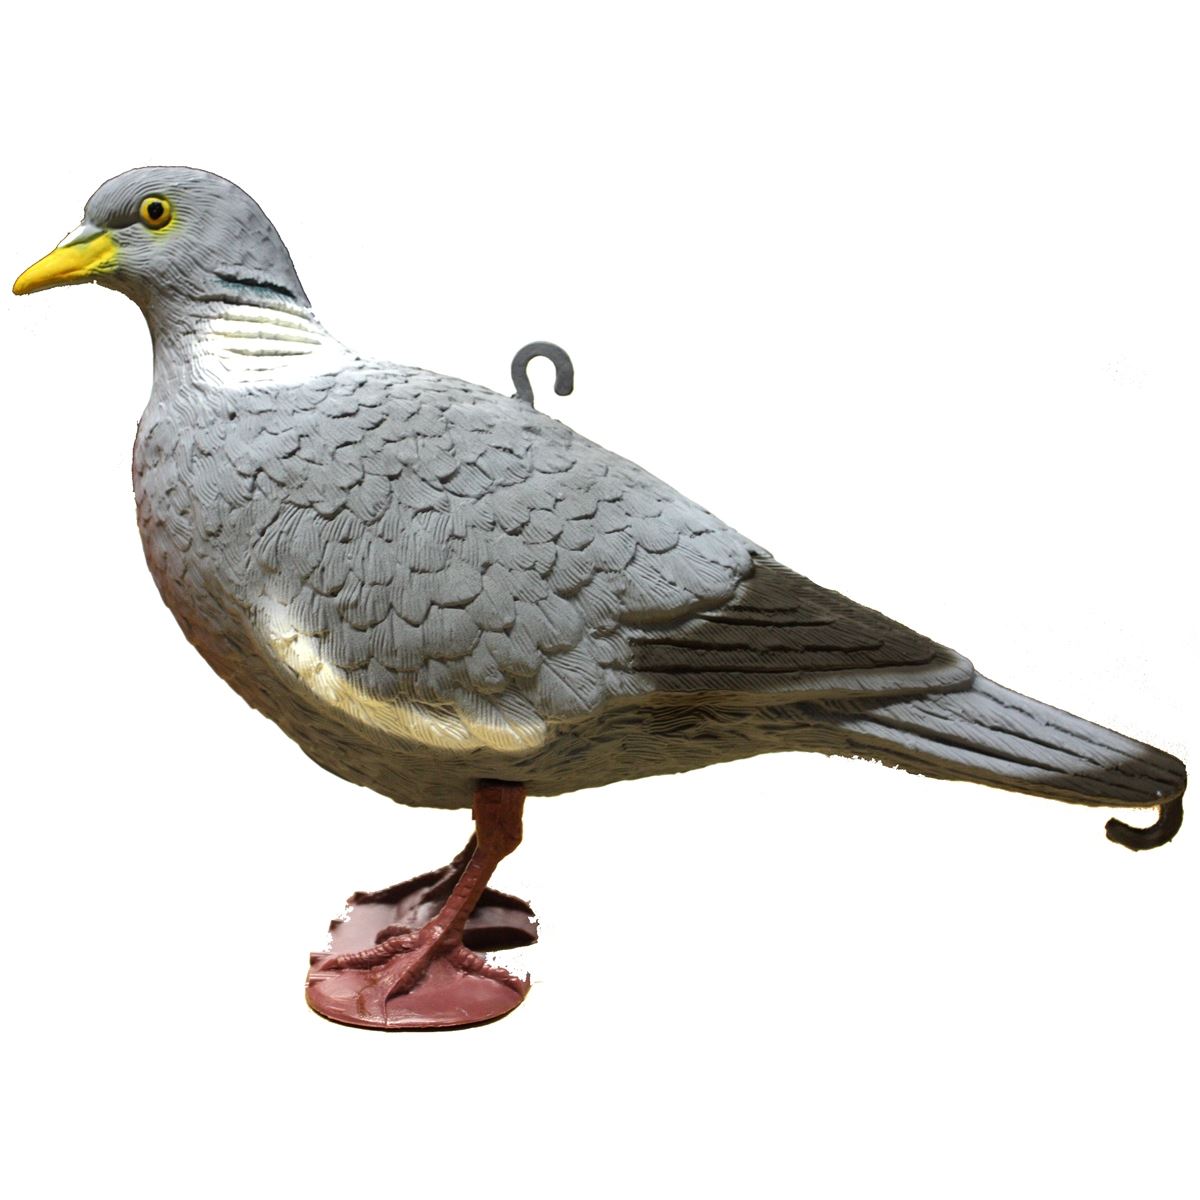 Sport Plast Full Body Pigeon Decoy with Feet Questions & Answers